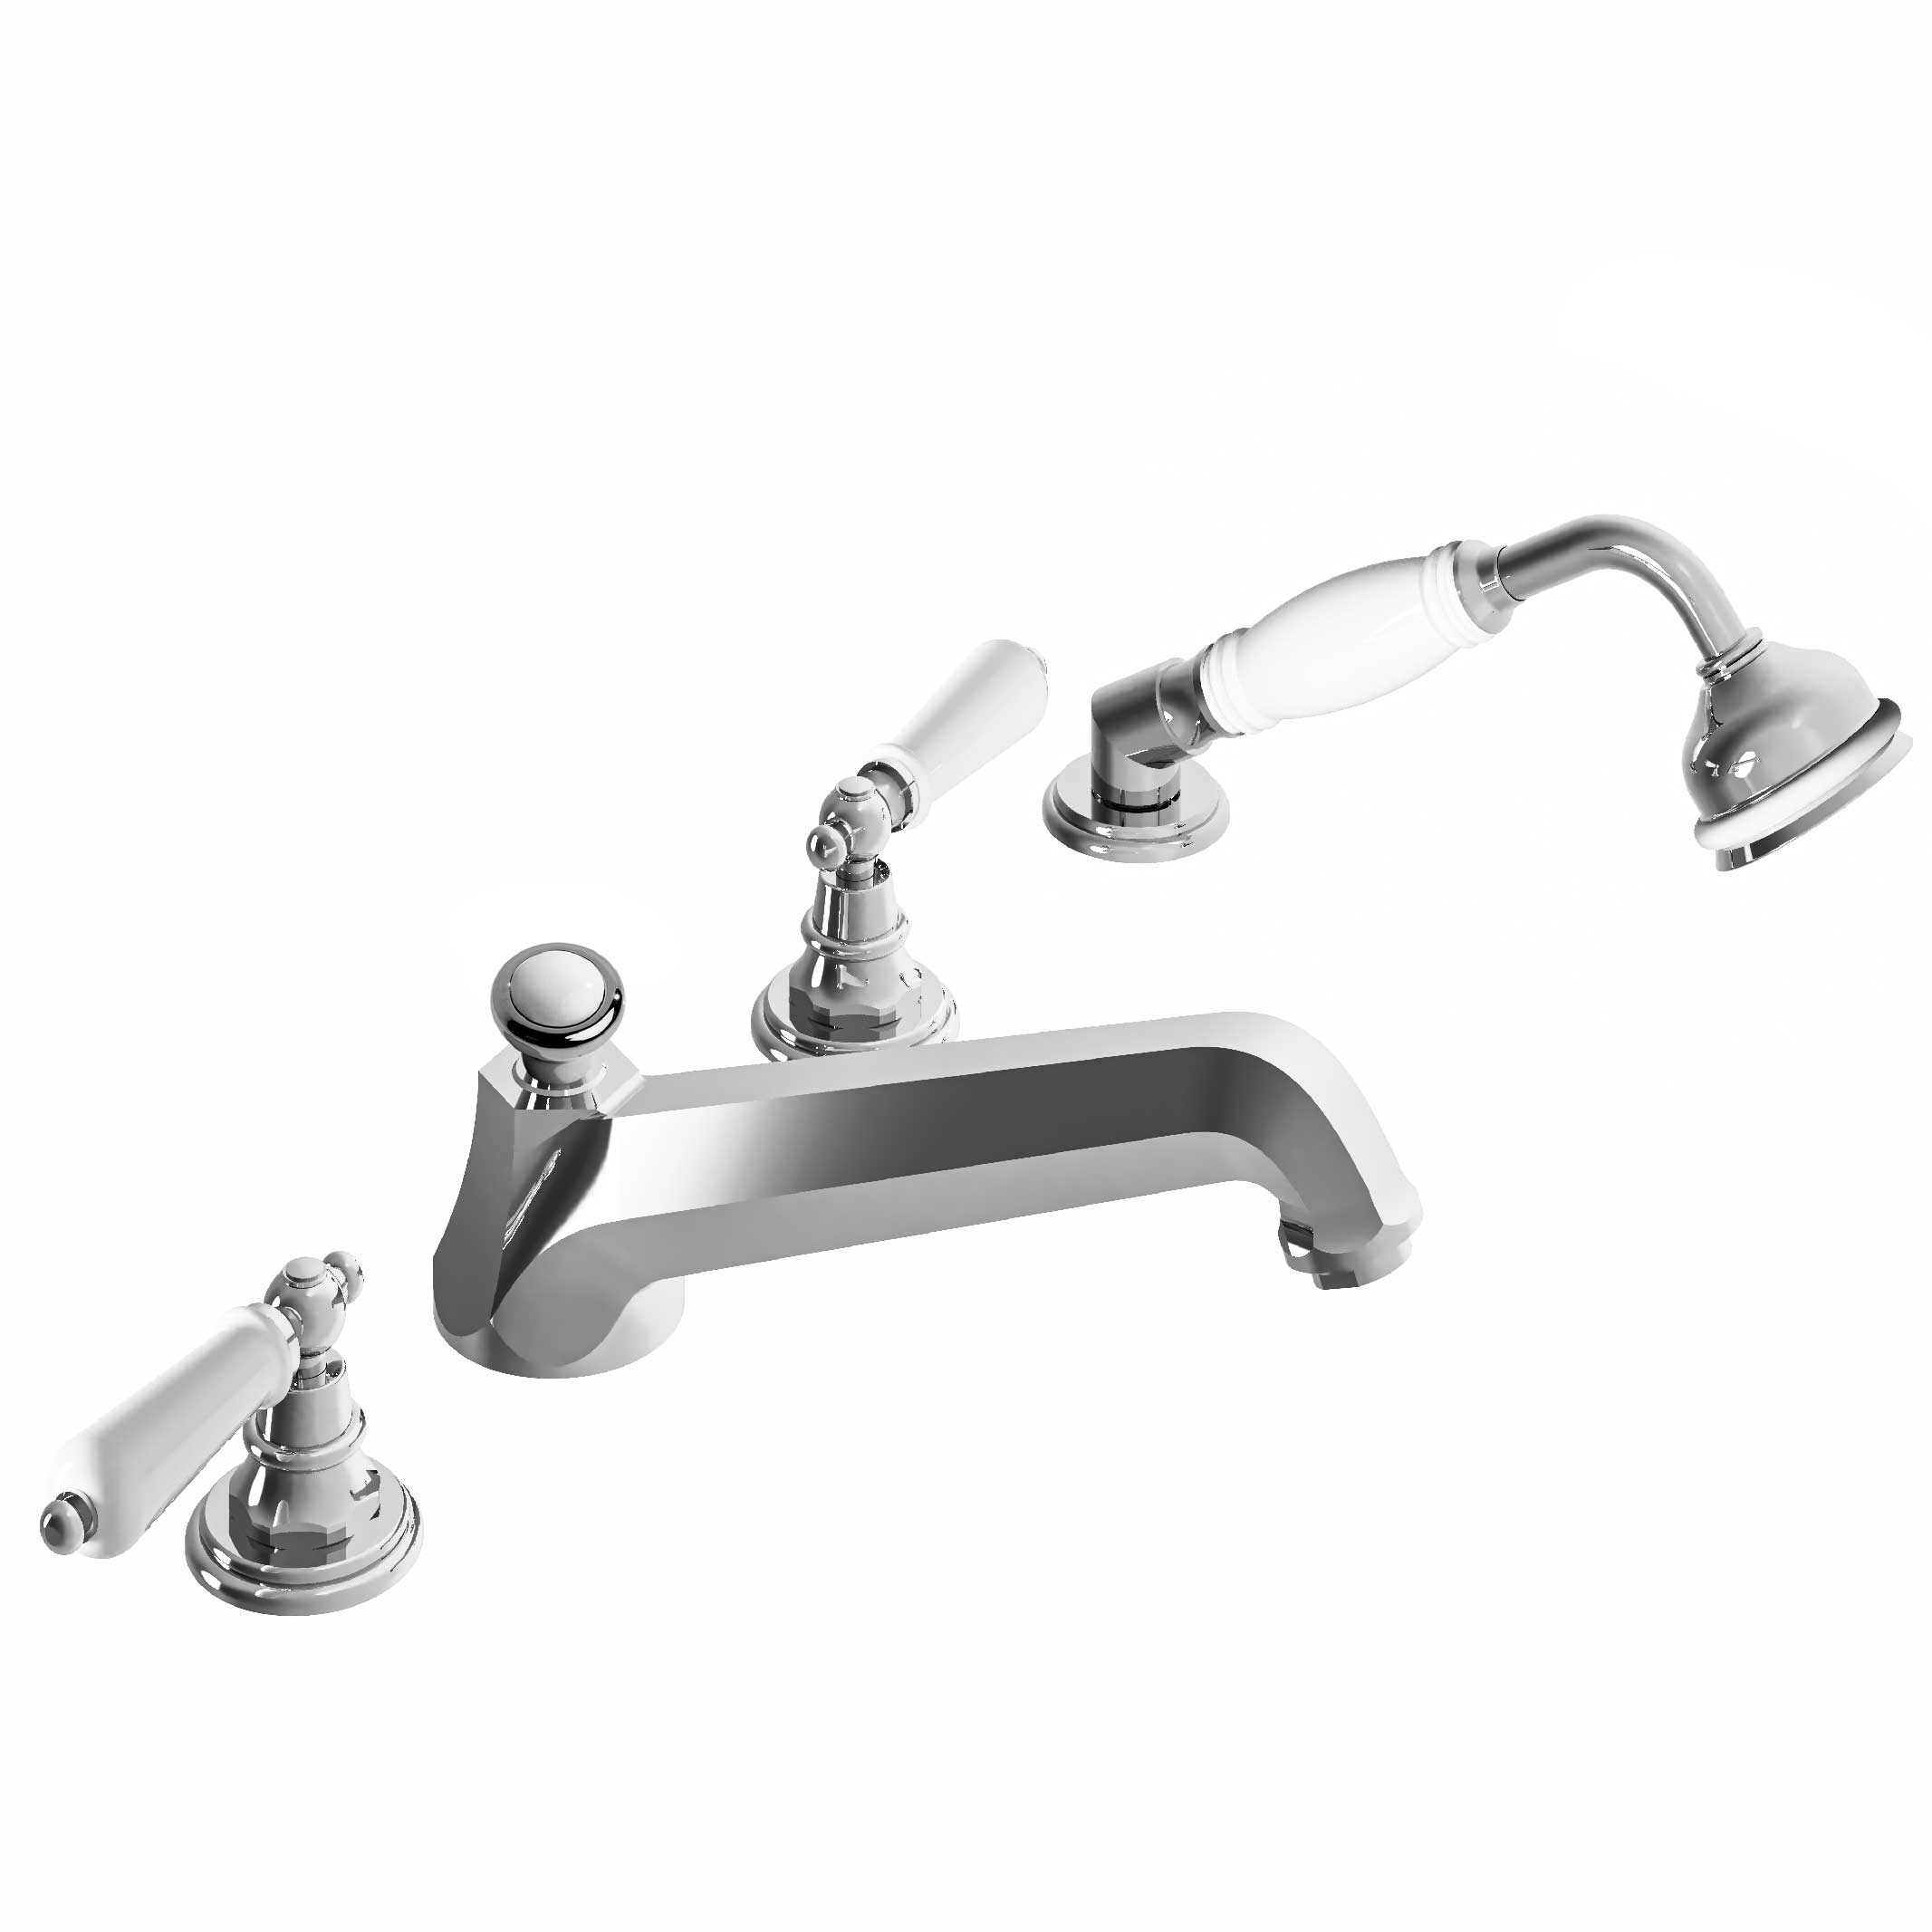 M32-3304 4-hole bath and shower mixer